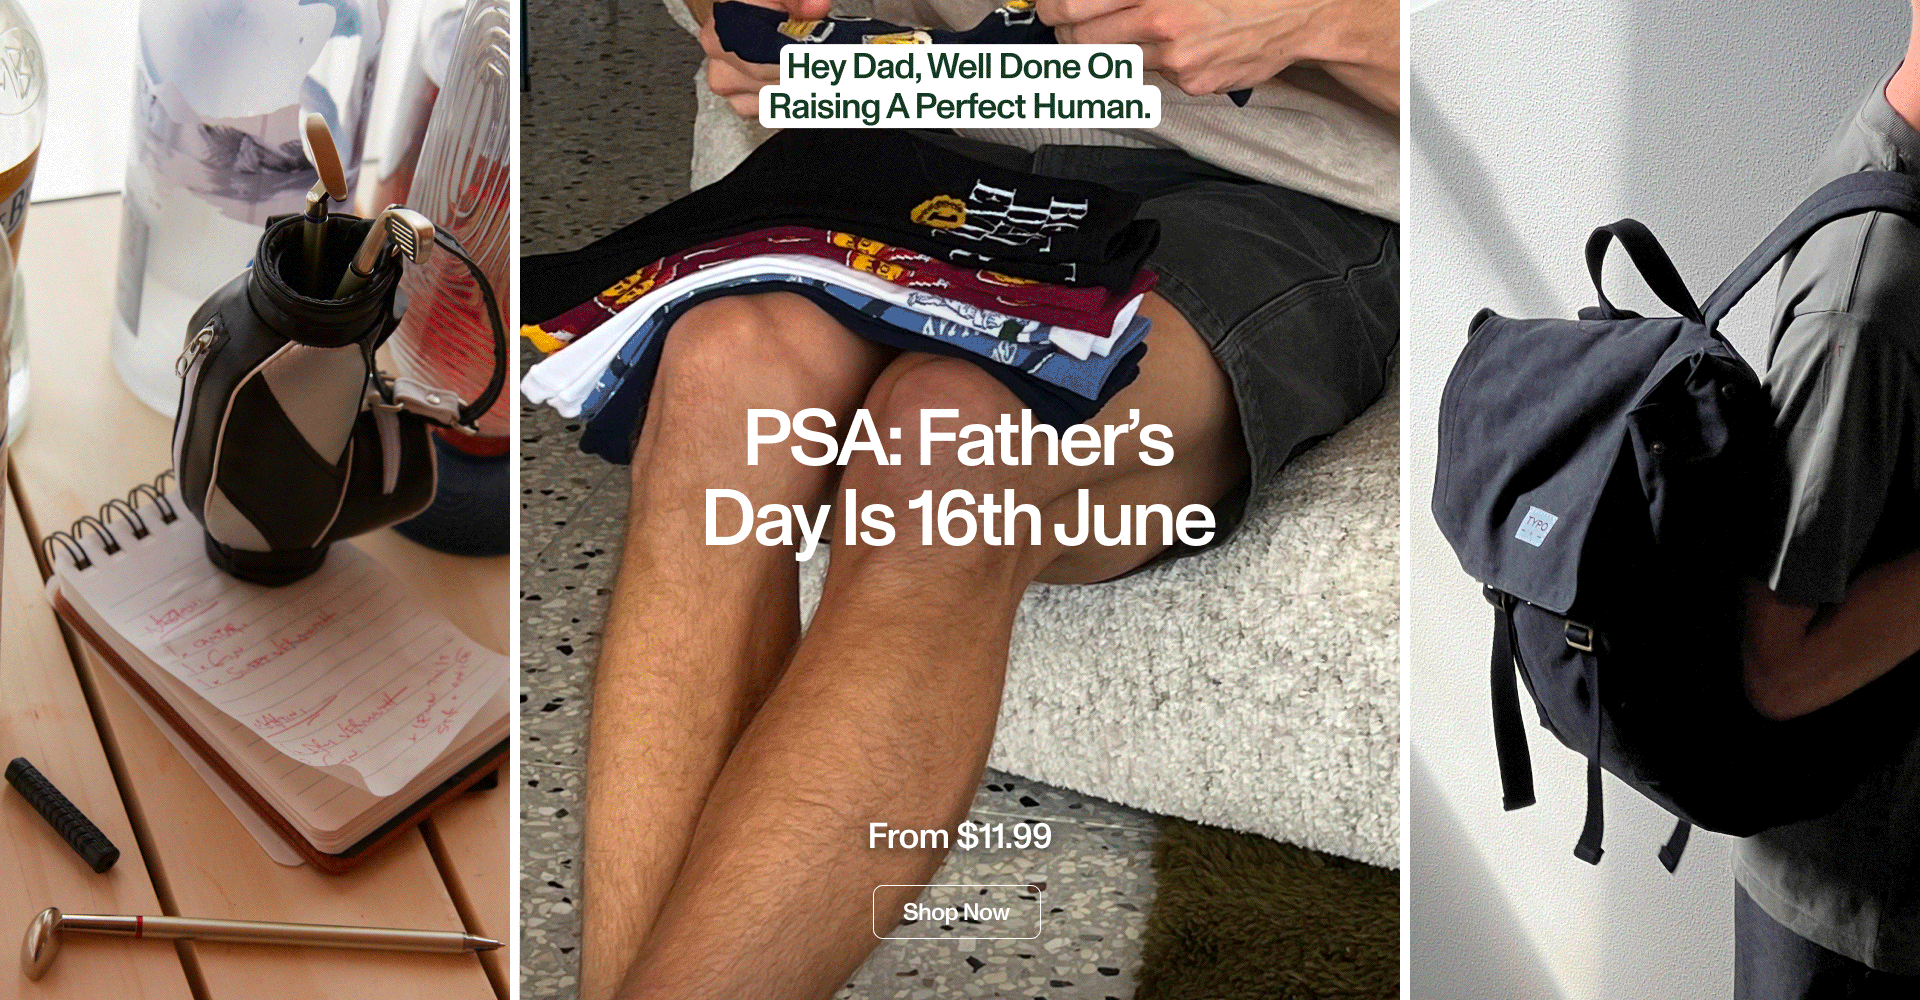 Thanks for teaching me how to fix shit. PSA: Father Day is 16th June. From $11.99. Shop Now.